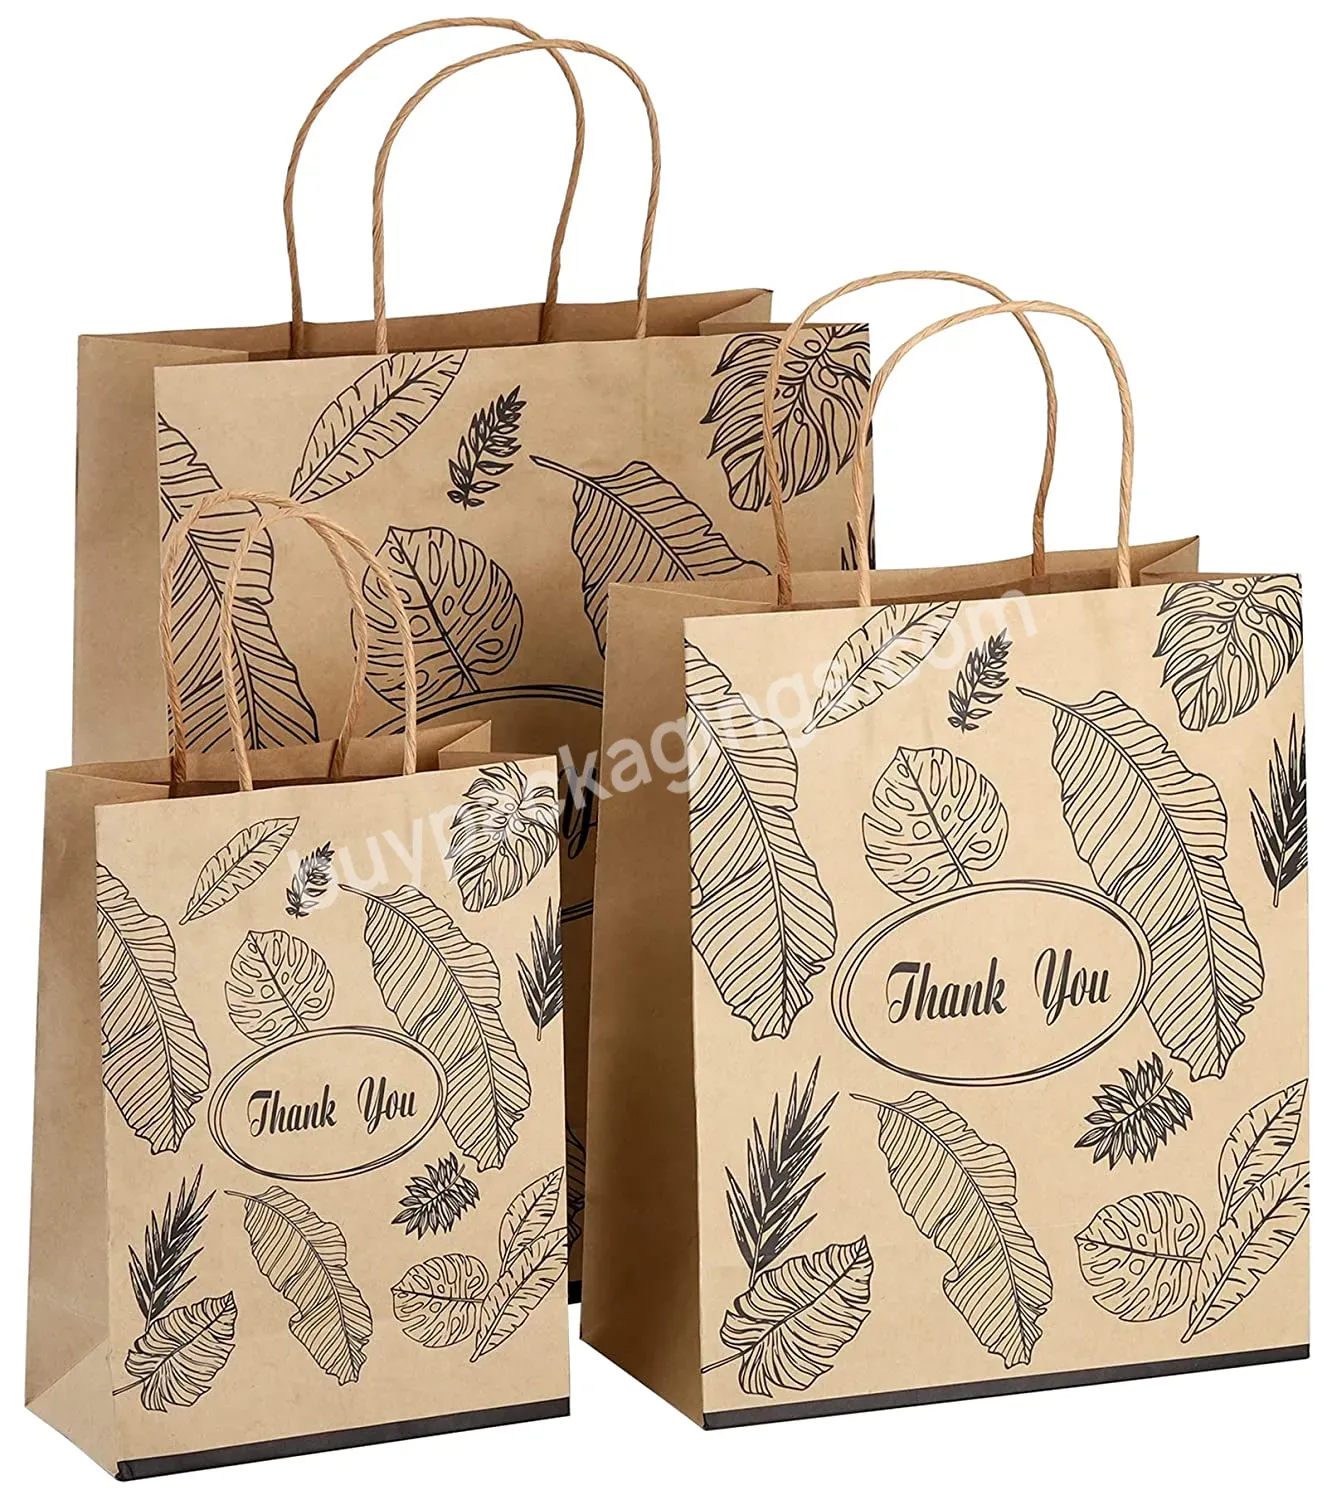 Thank You Paper Bags With Handles Bulk Paper Shopping Bags